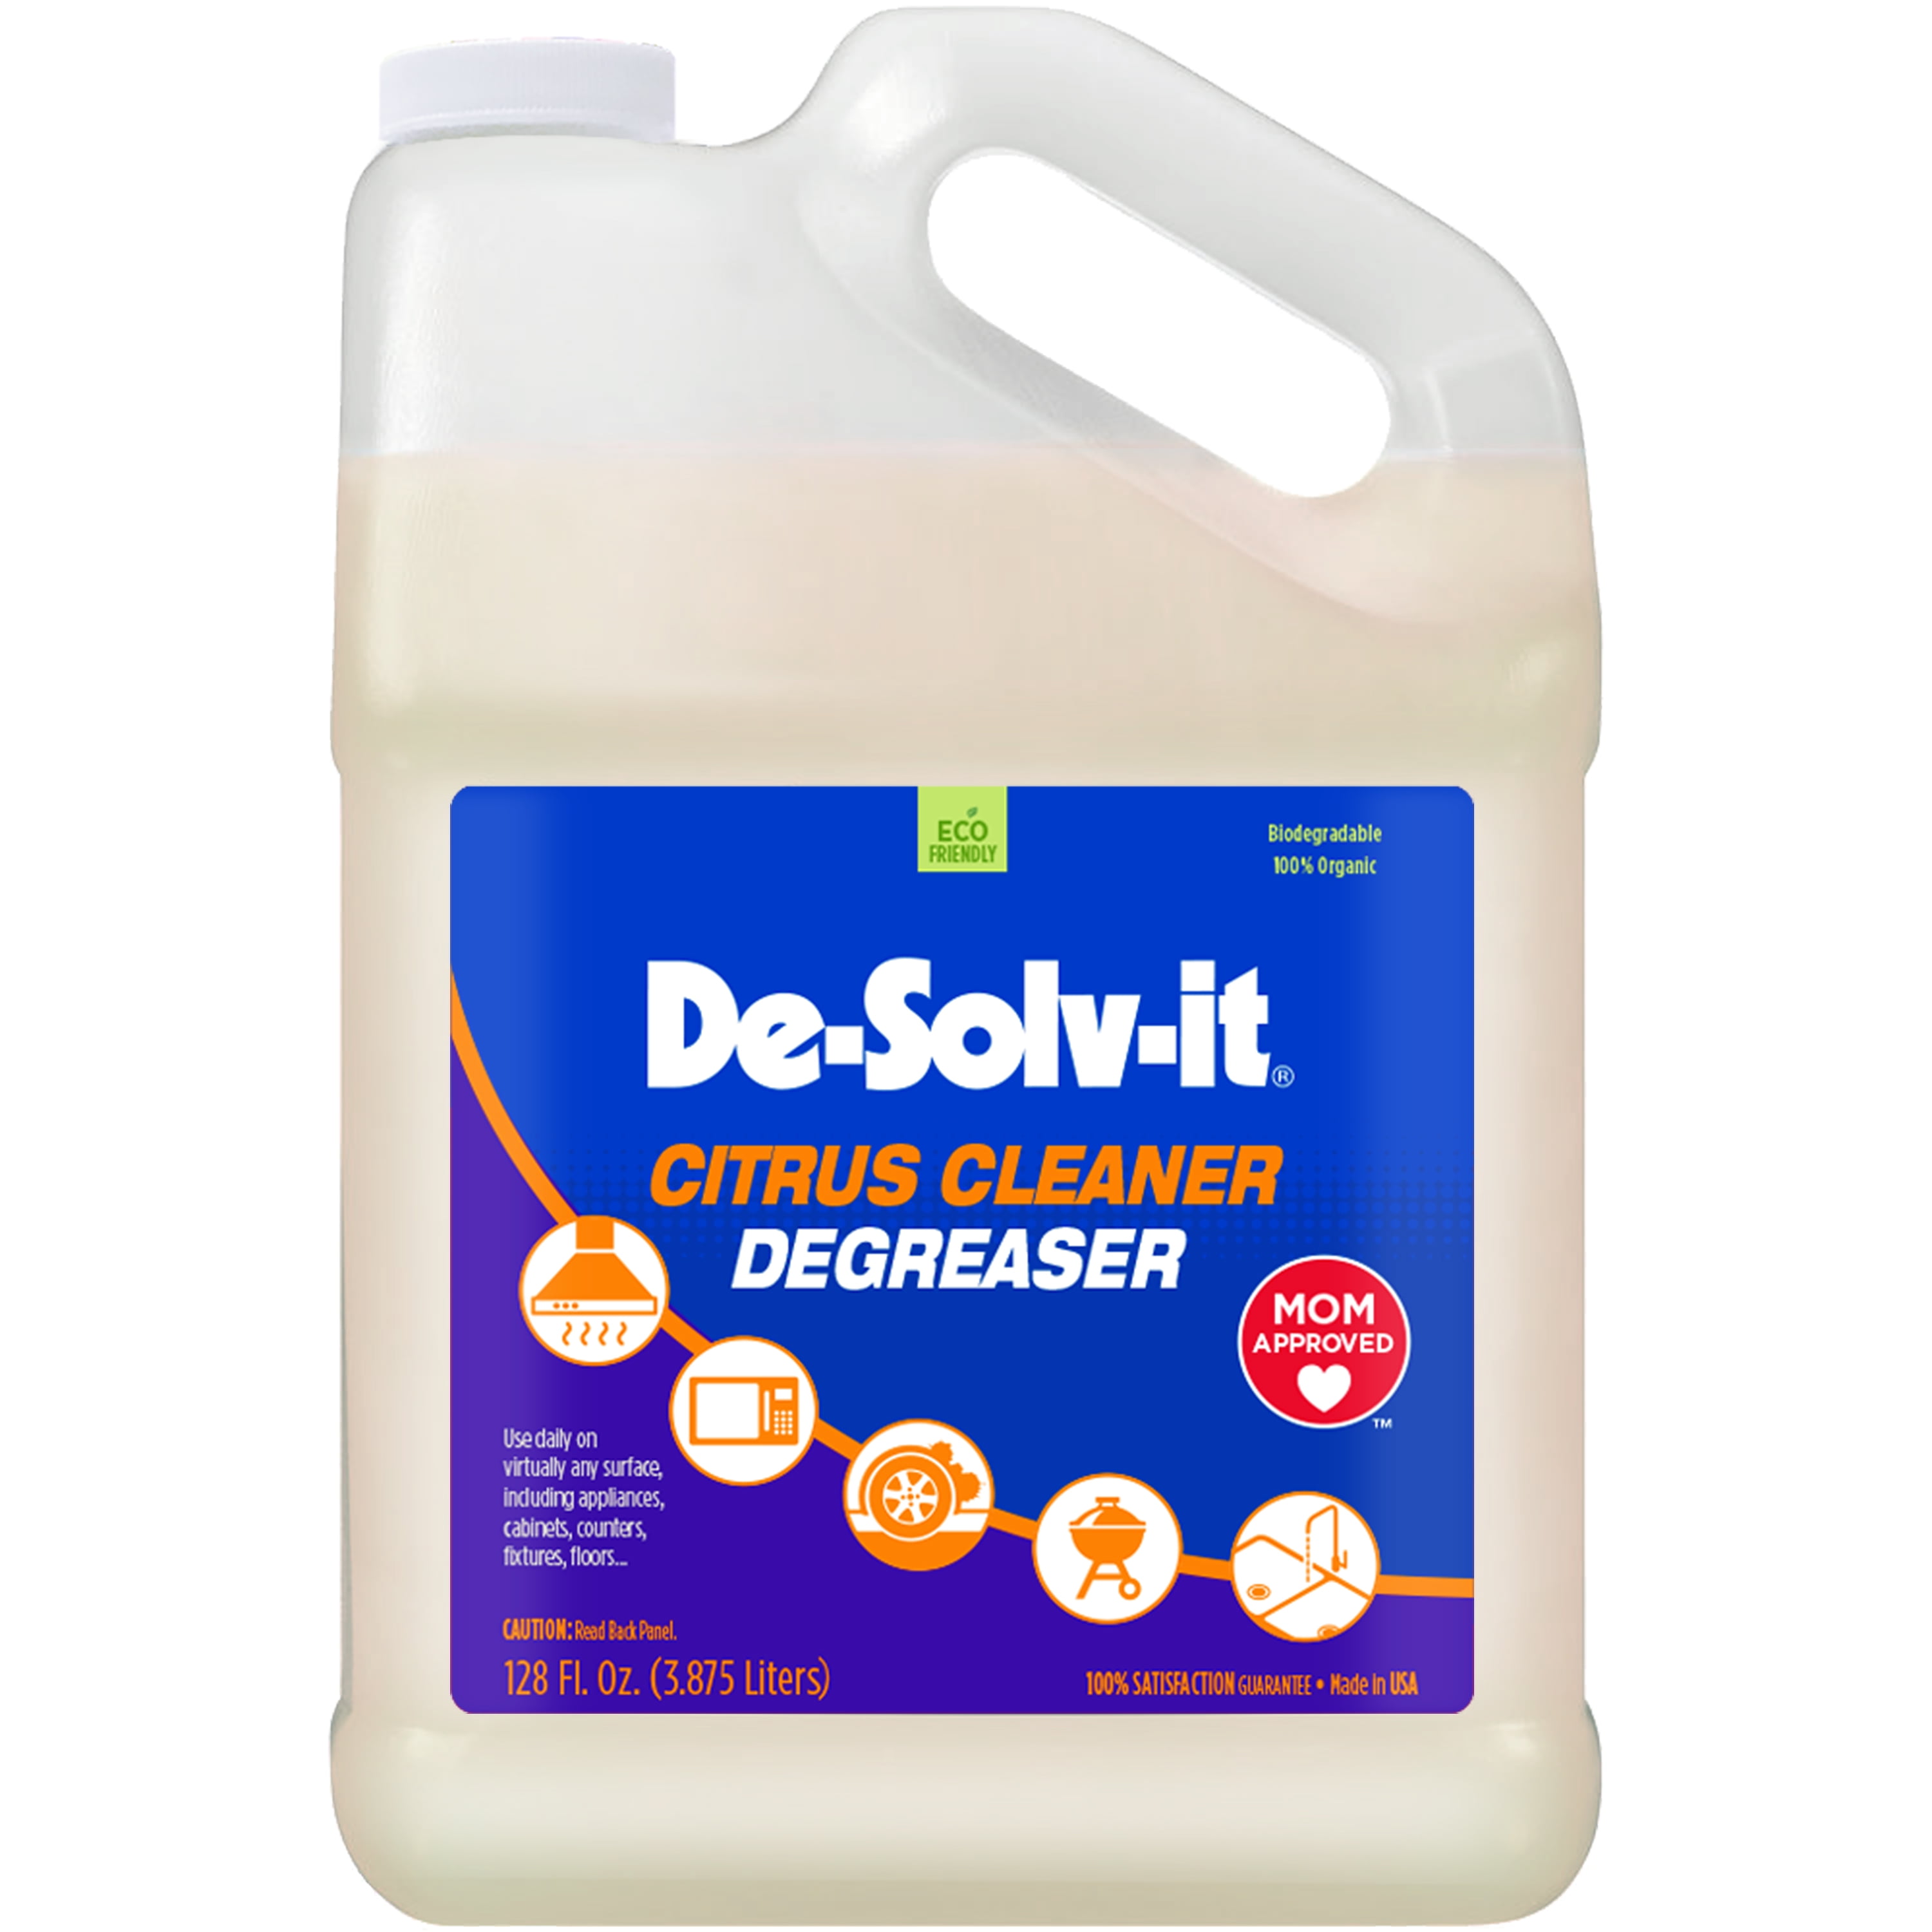 3D Orange Citrus All Purpose Cleaner and Degreaser 1 Gal 